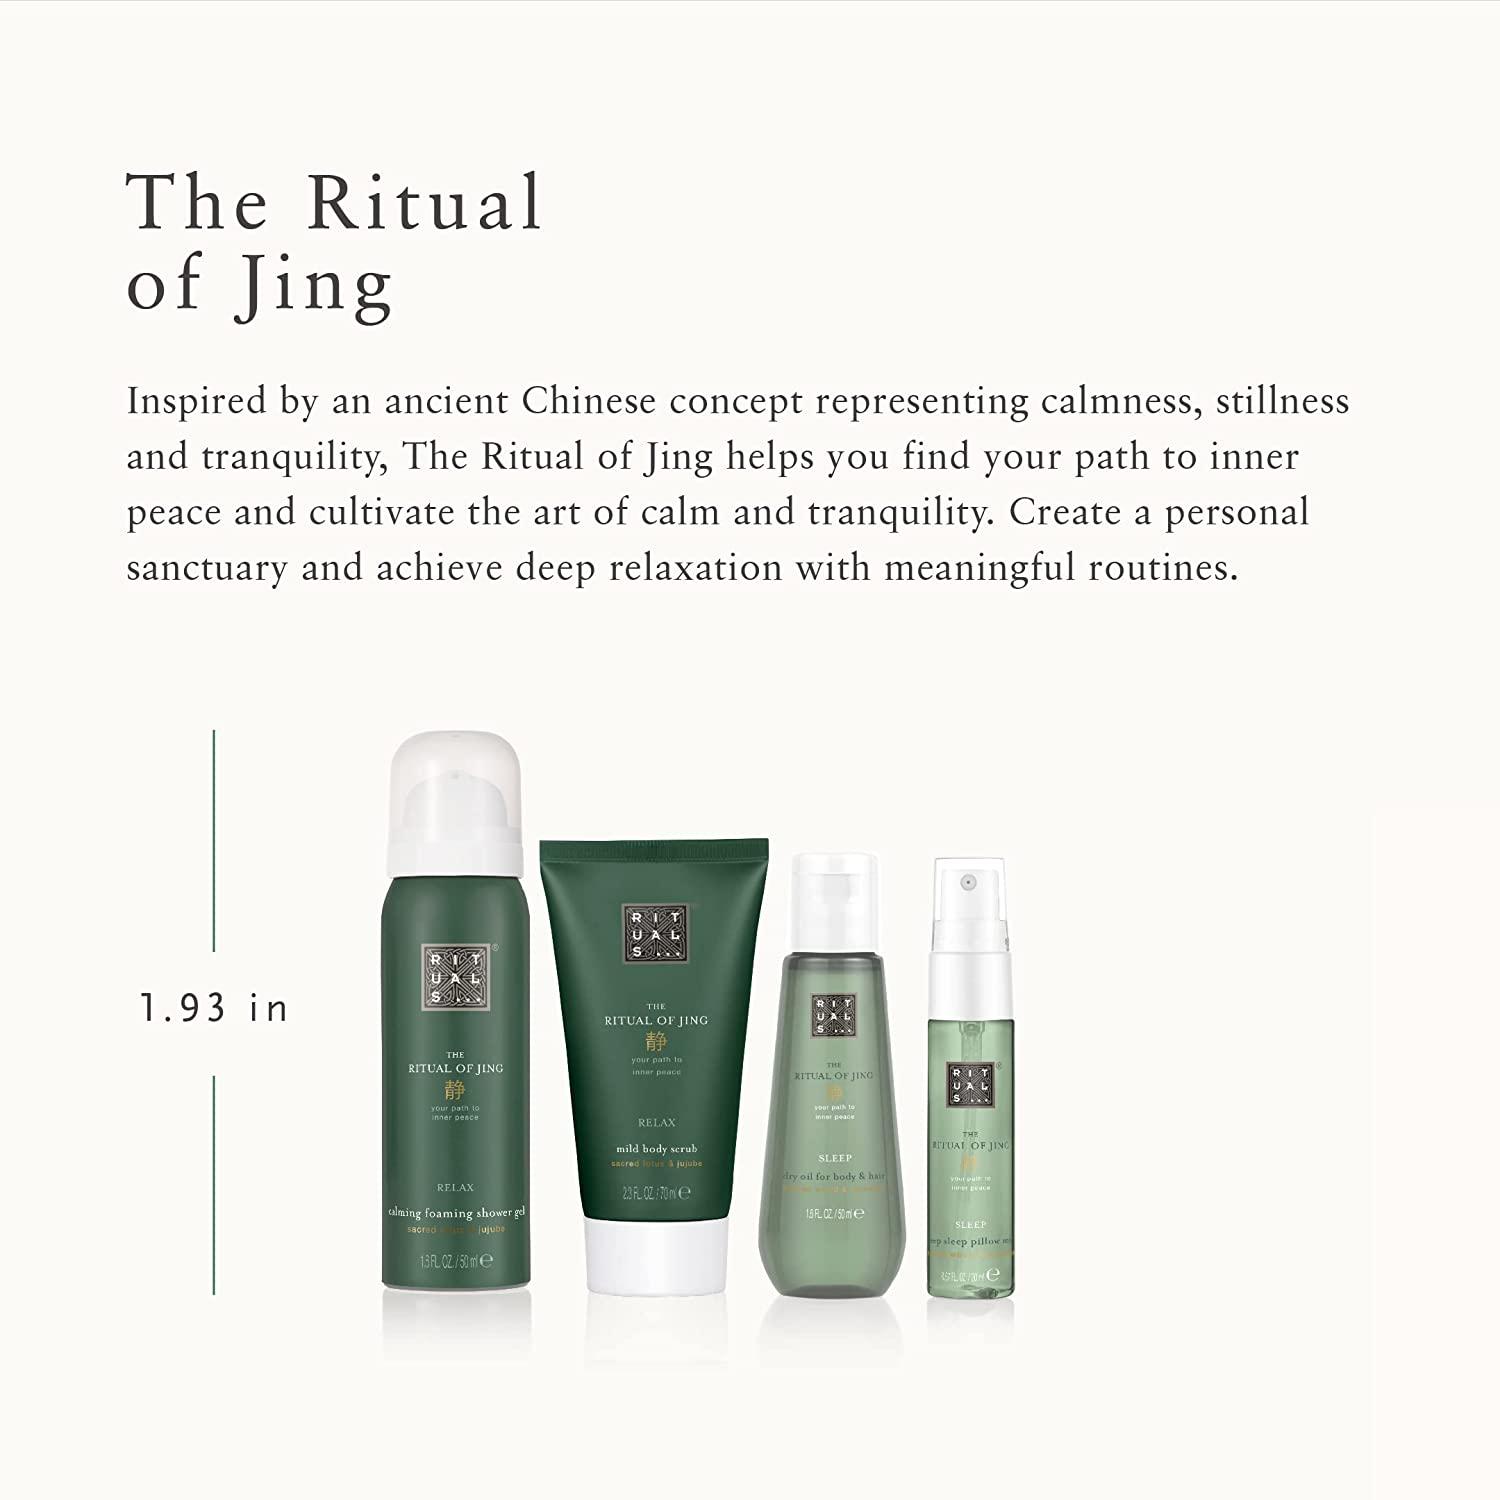 RITUALS Jing Calming Gift Set - Foaming Shower Gel, Body Scrub, Dry Body  Oil & Sleep Pillow Mist with Sacred Lotus & Jujube - Small